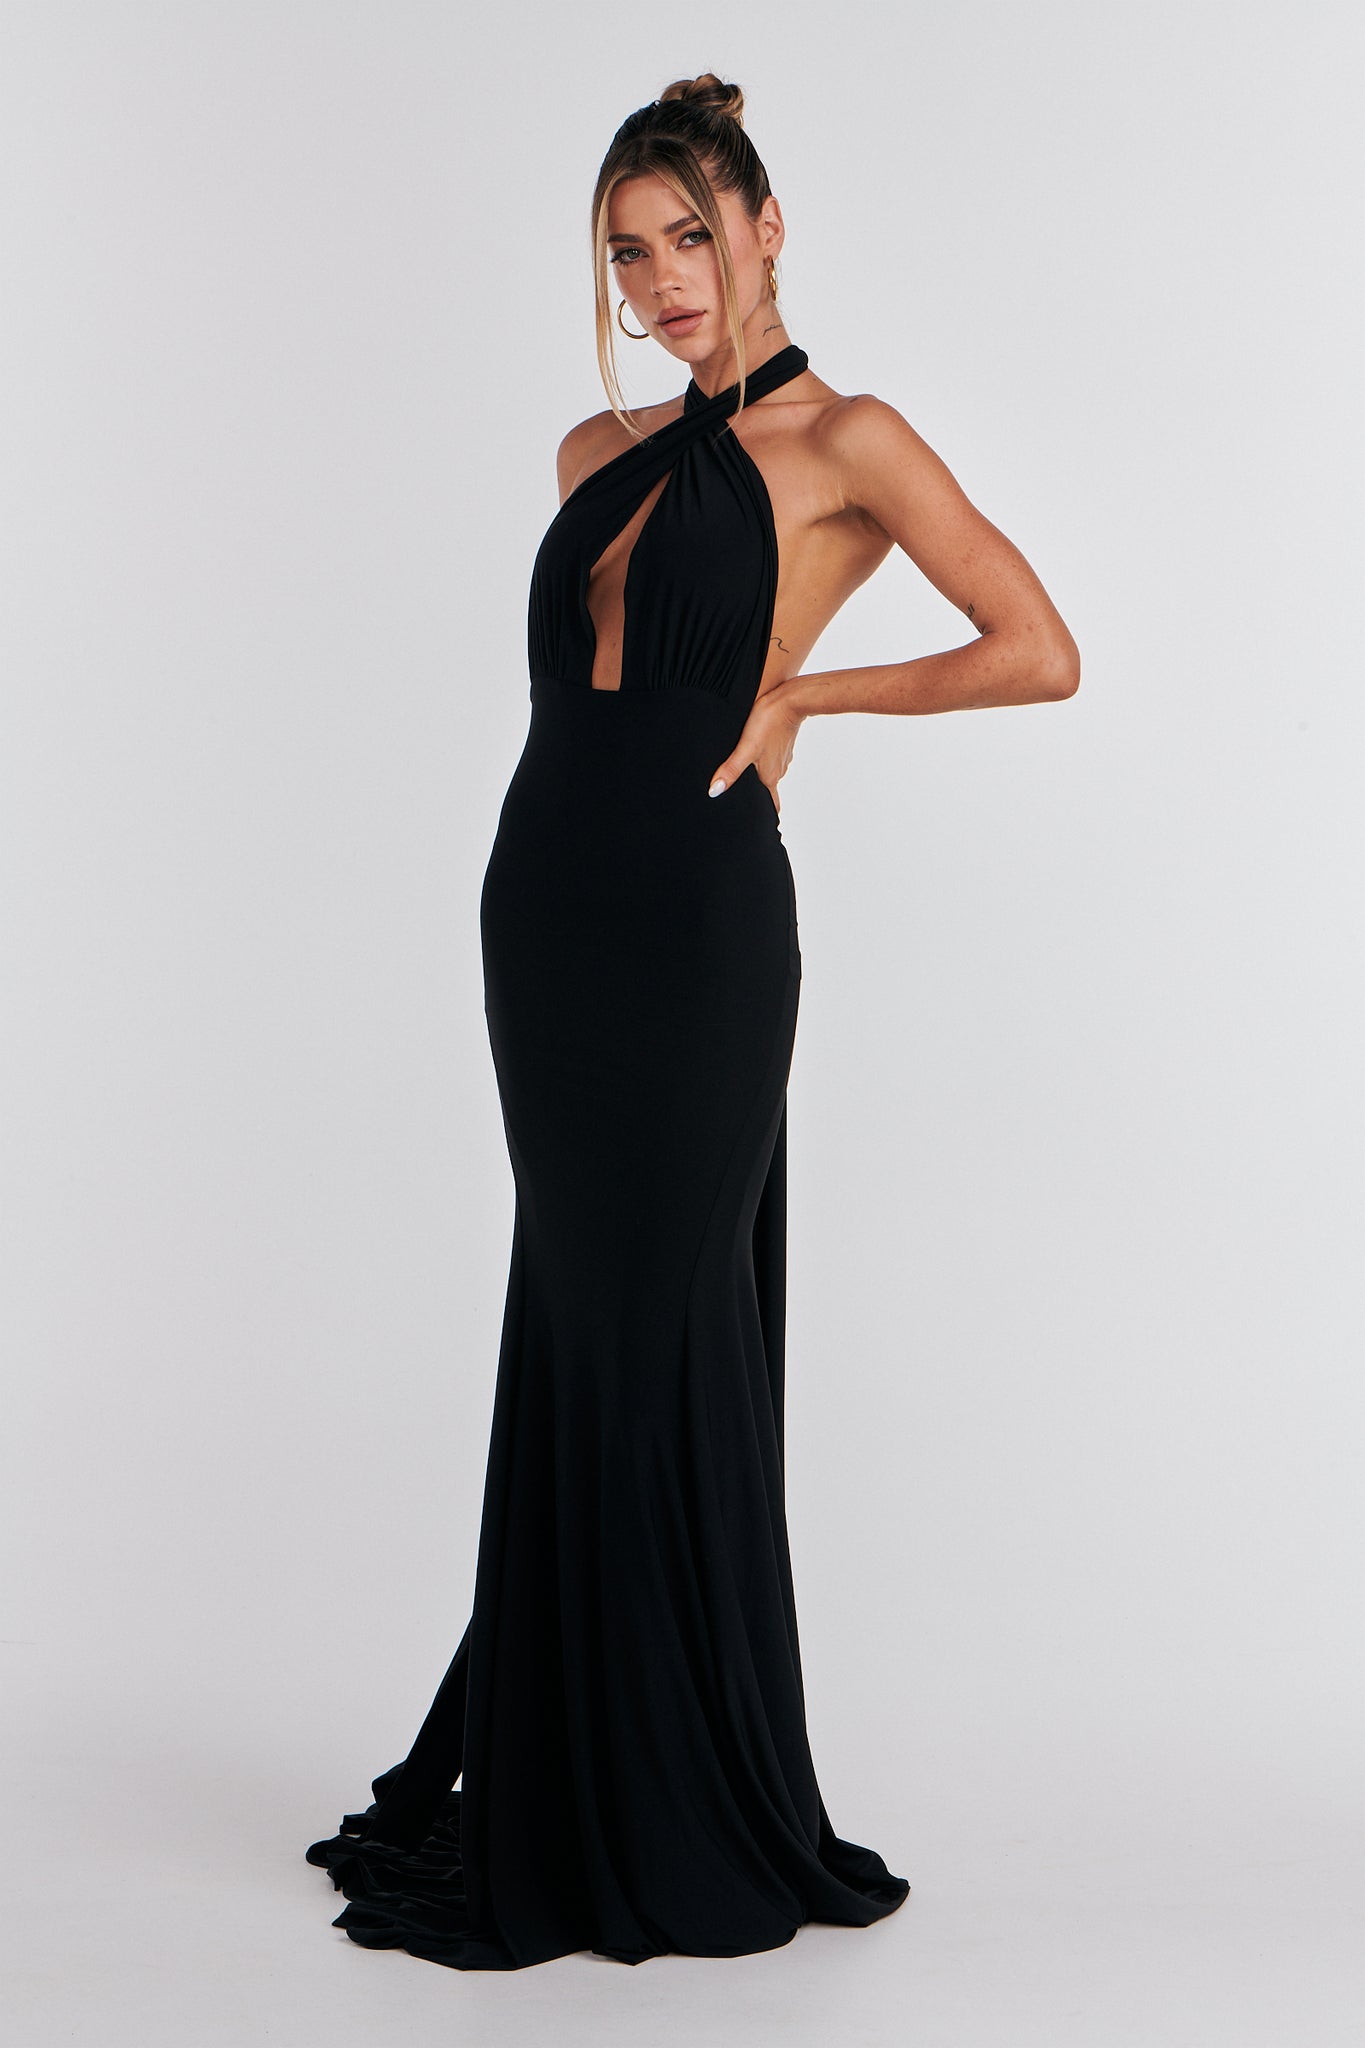 MÉLANI The Label ELIANA Black Multi Tie Backless Bridesmaid Formal Gown